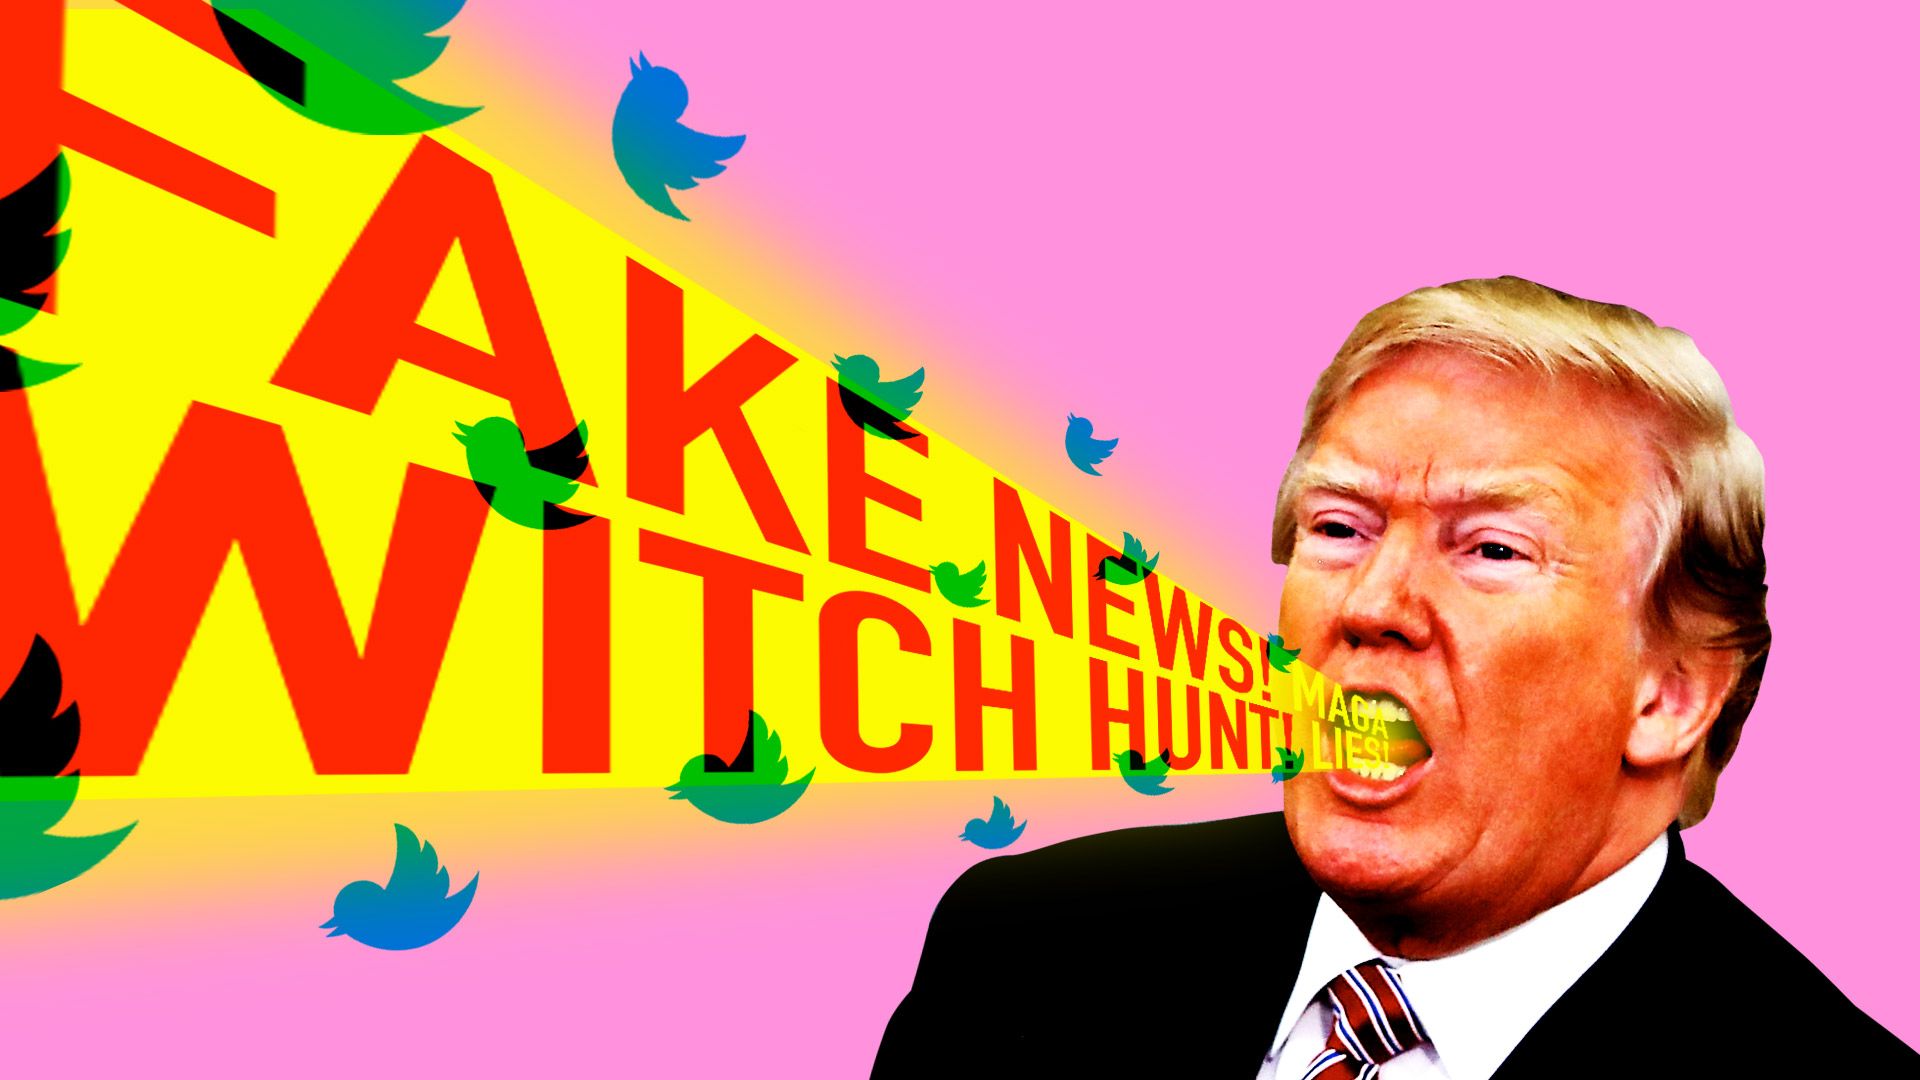 Trump yelling "fake news" and "witch hunt."